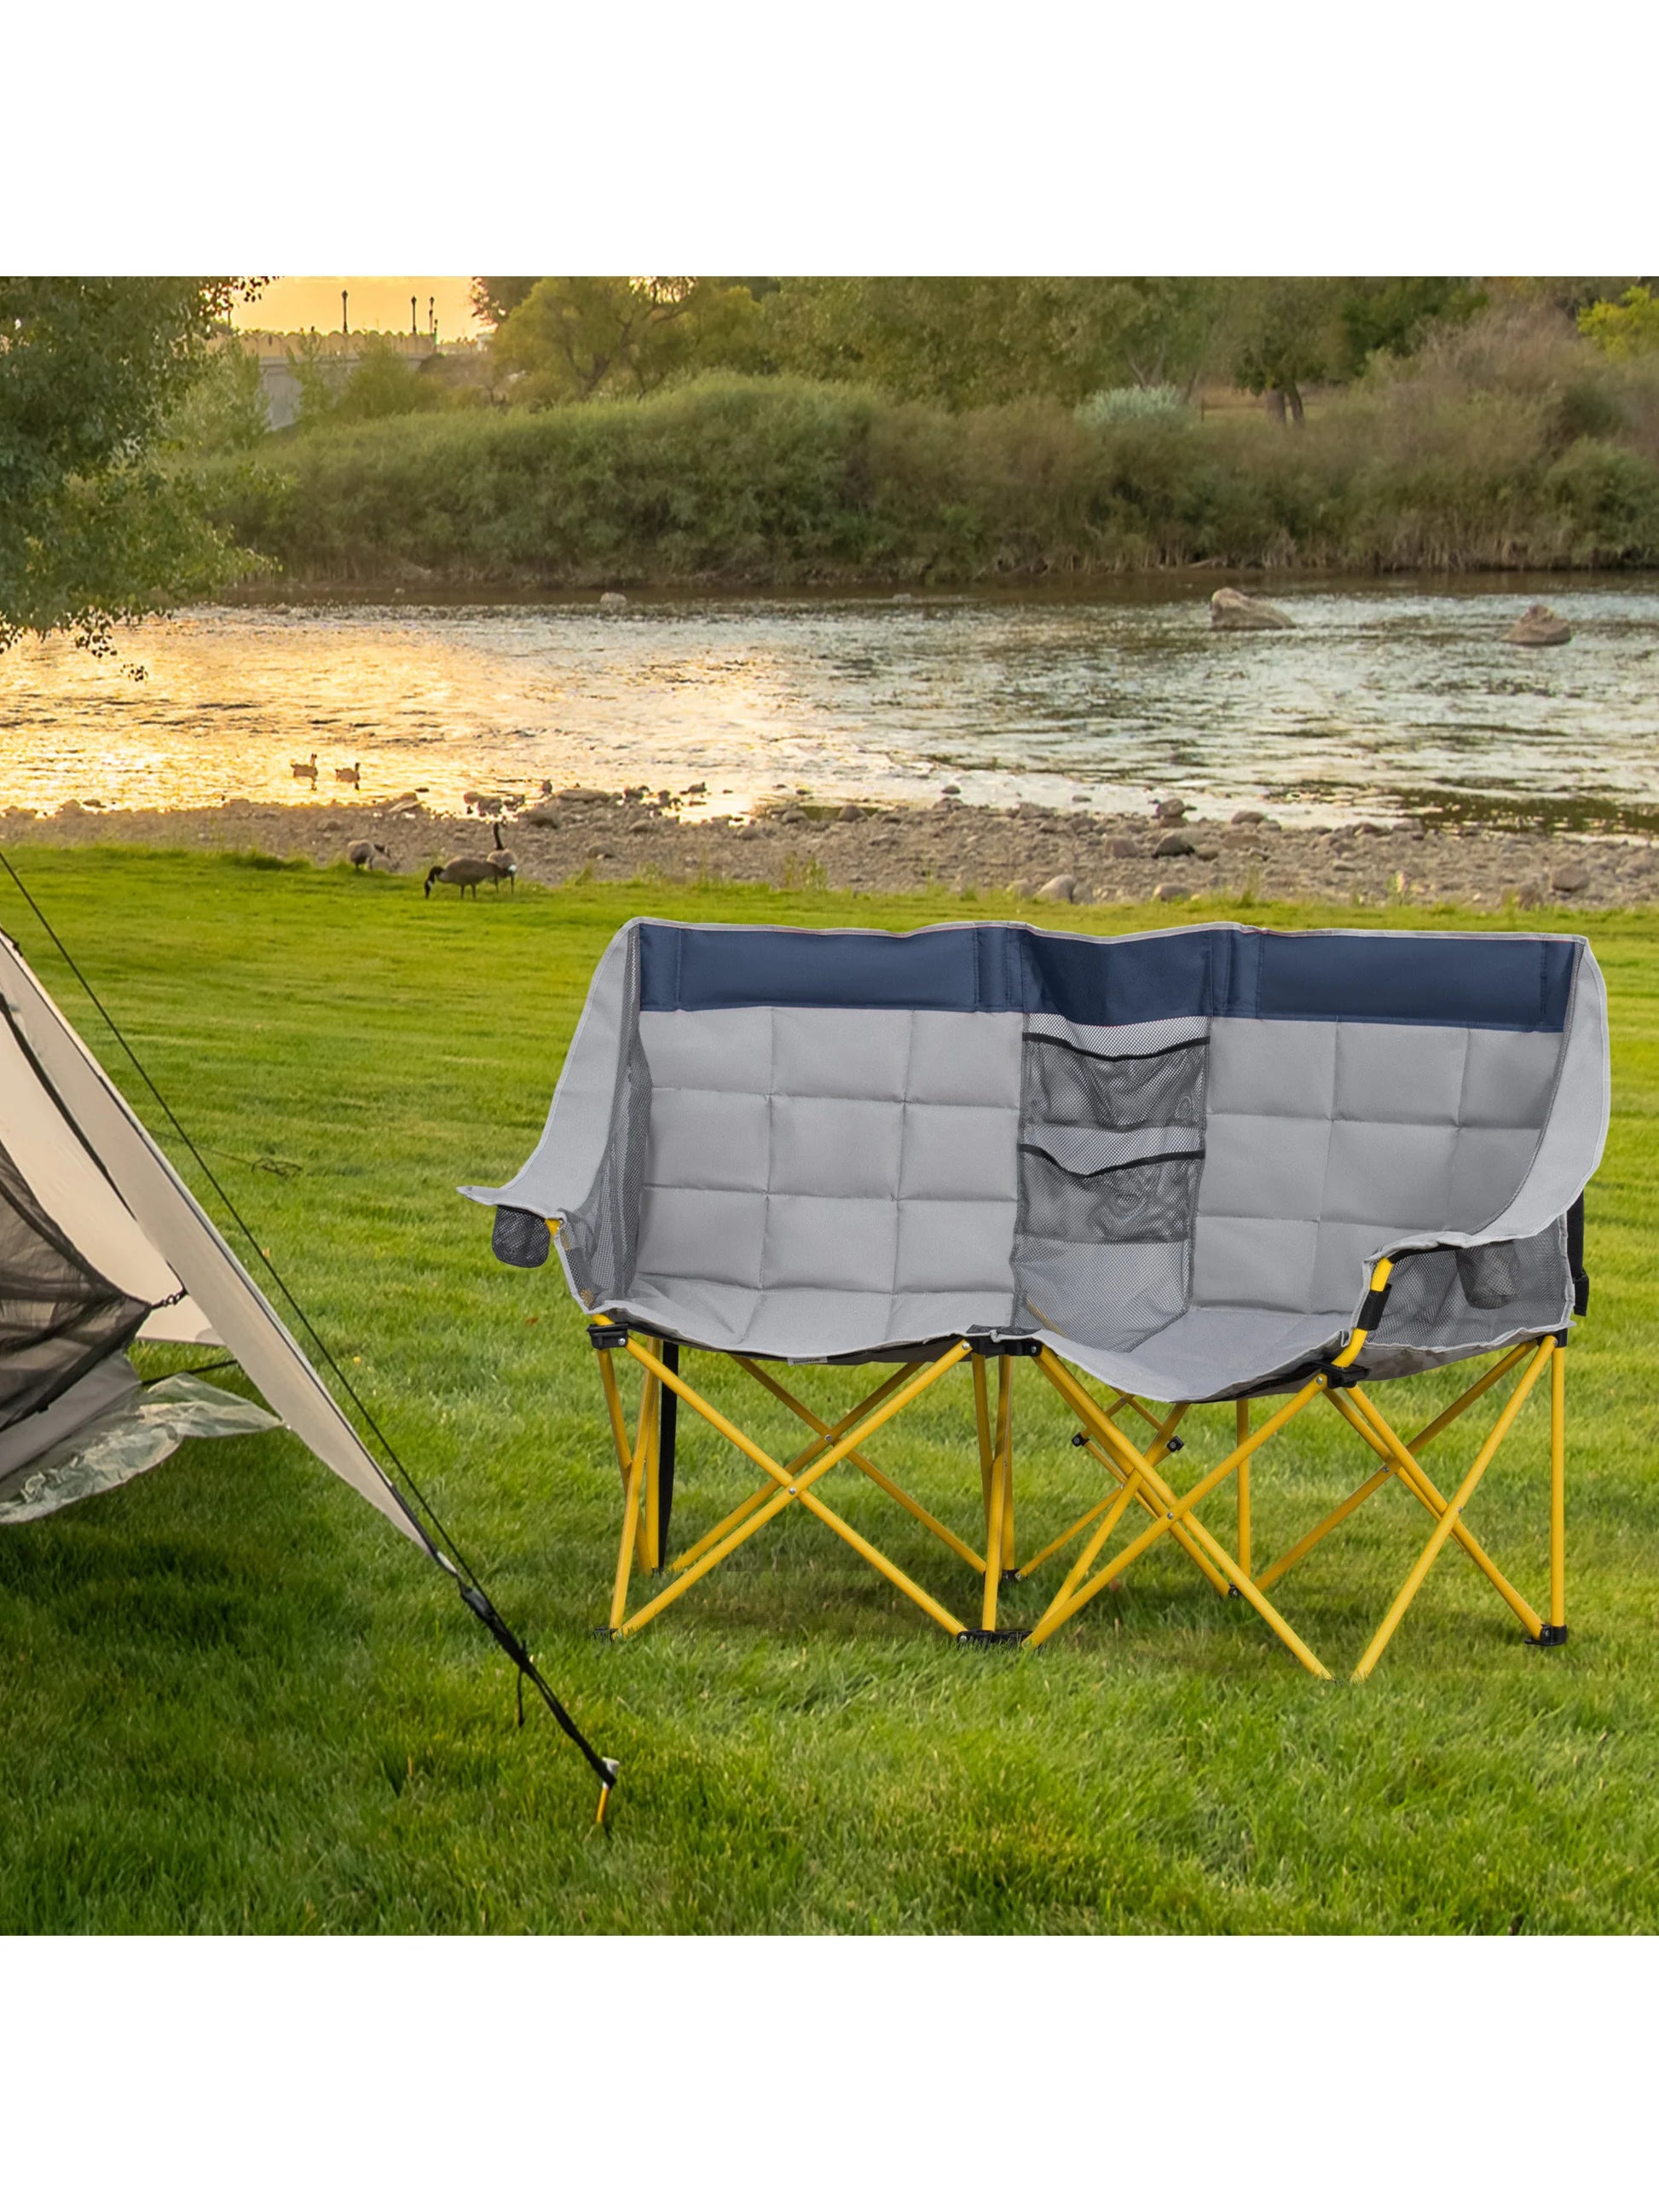 Loveseat Style Oversized Camping Chair with Carry Bag & Cup Holders